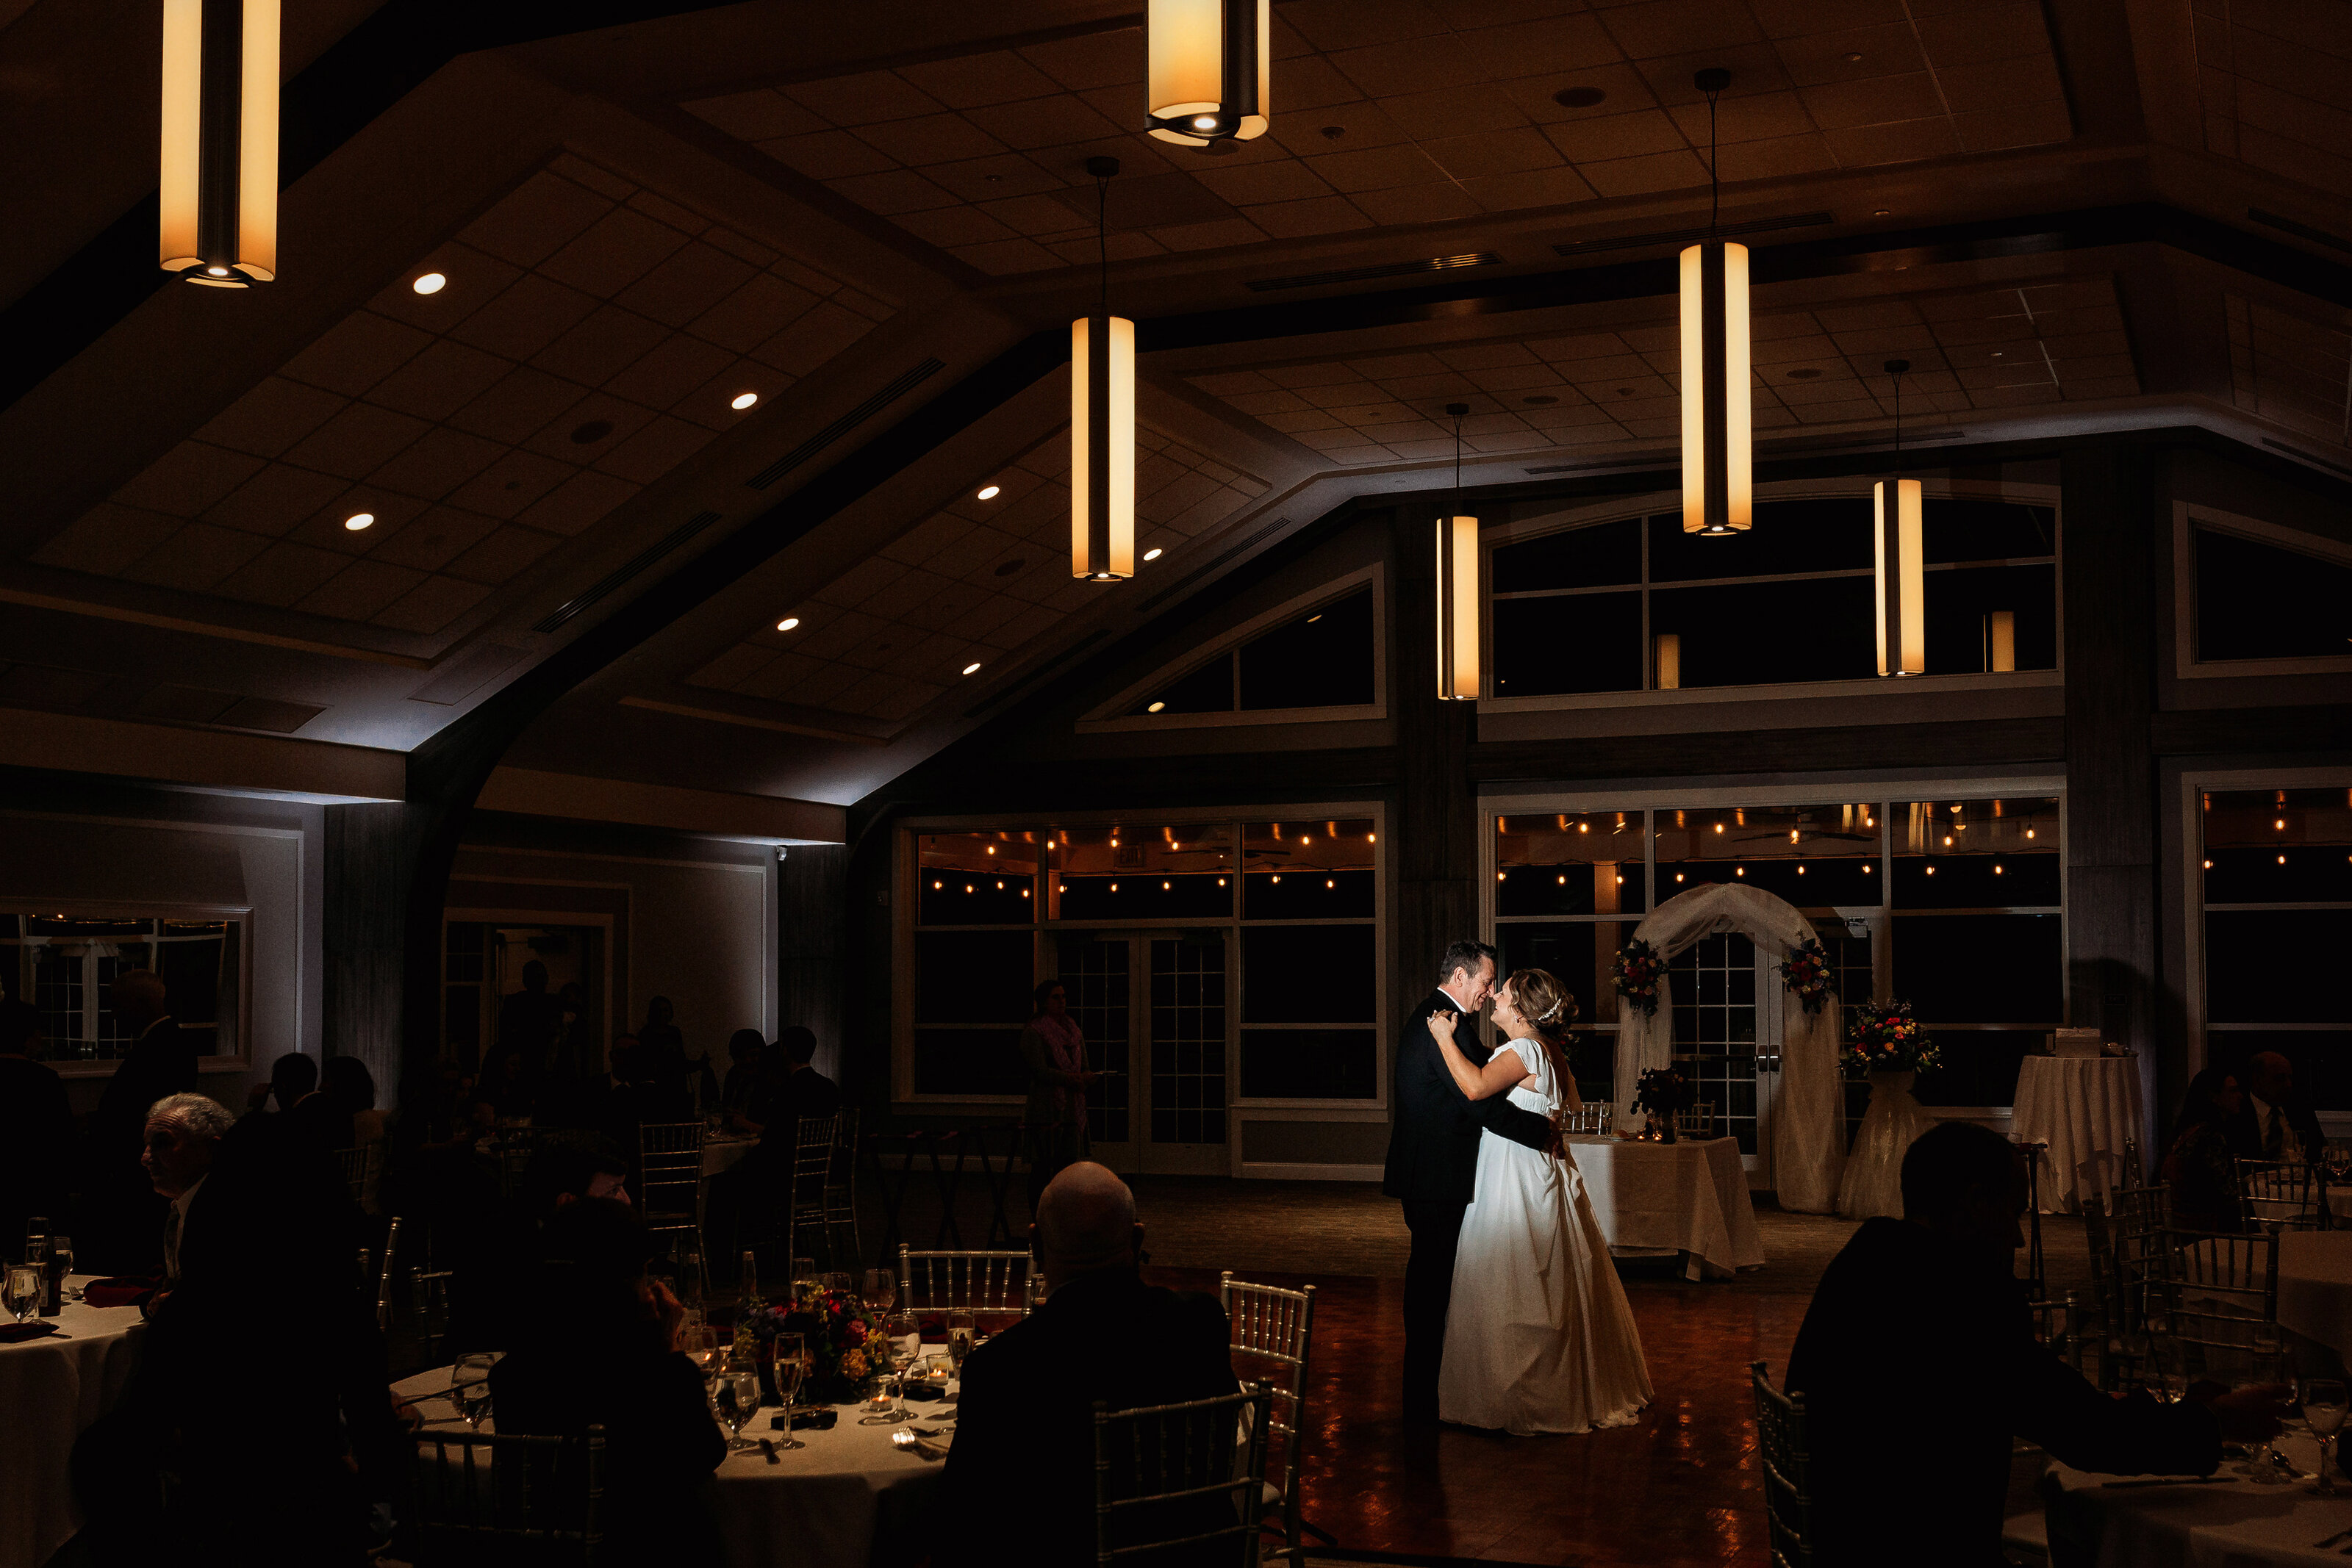 Married couple dances for photos on their wedding day at the Mercer County boathouse in New Jersey